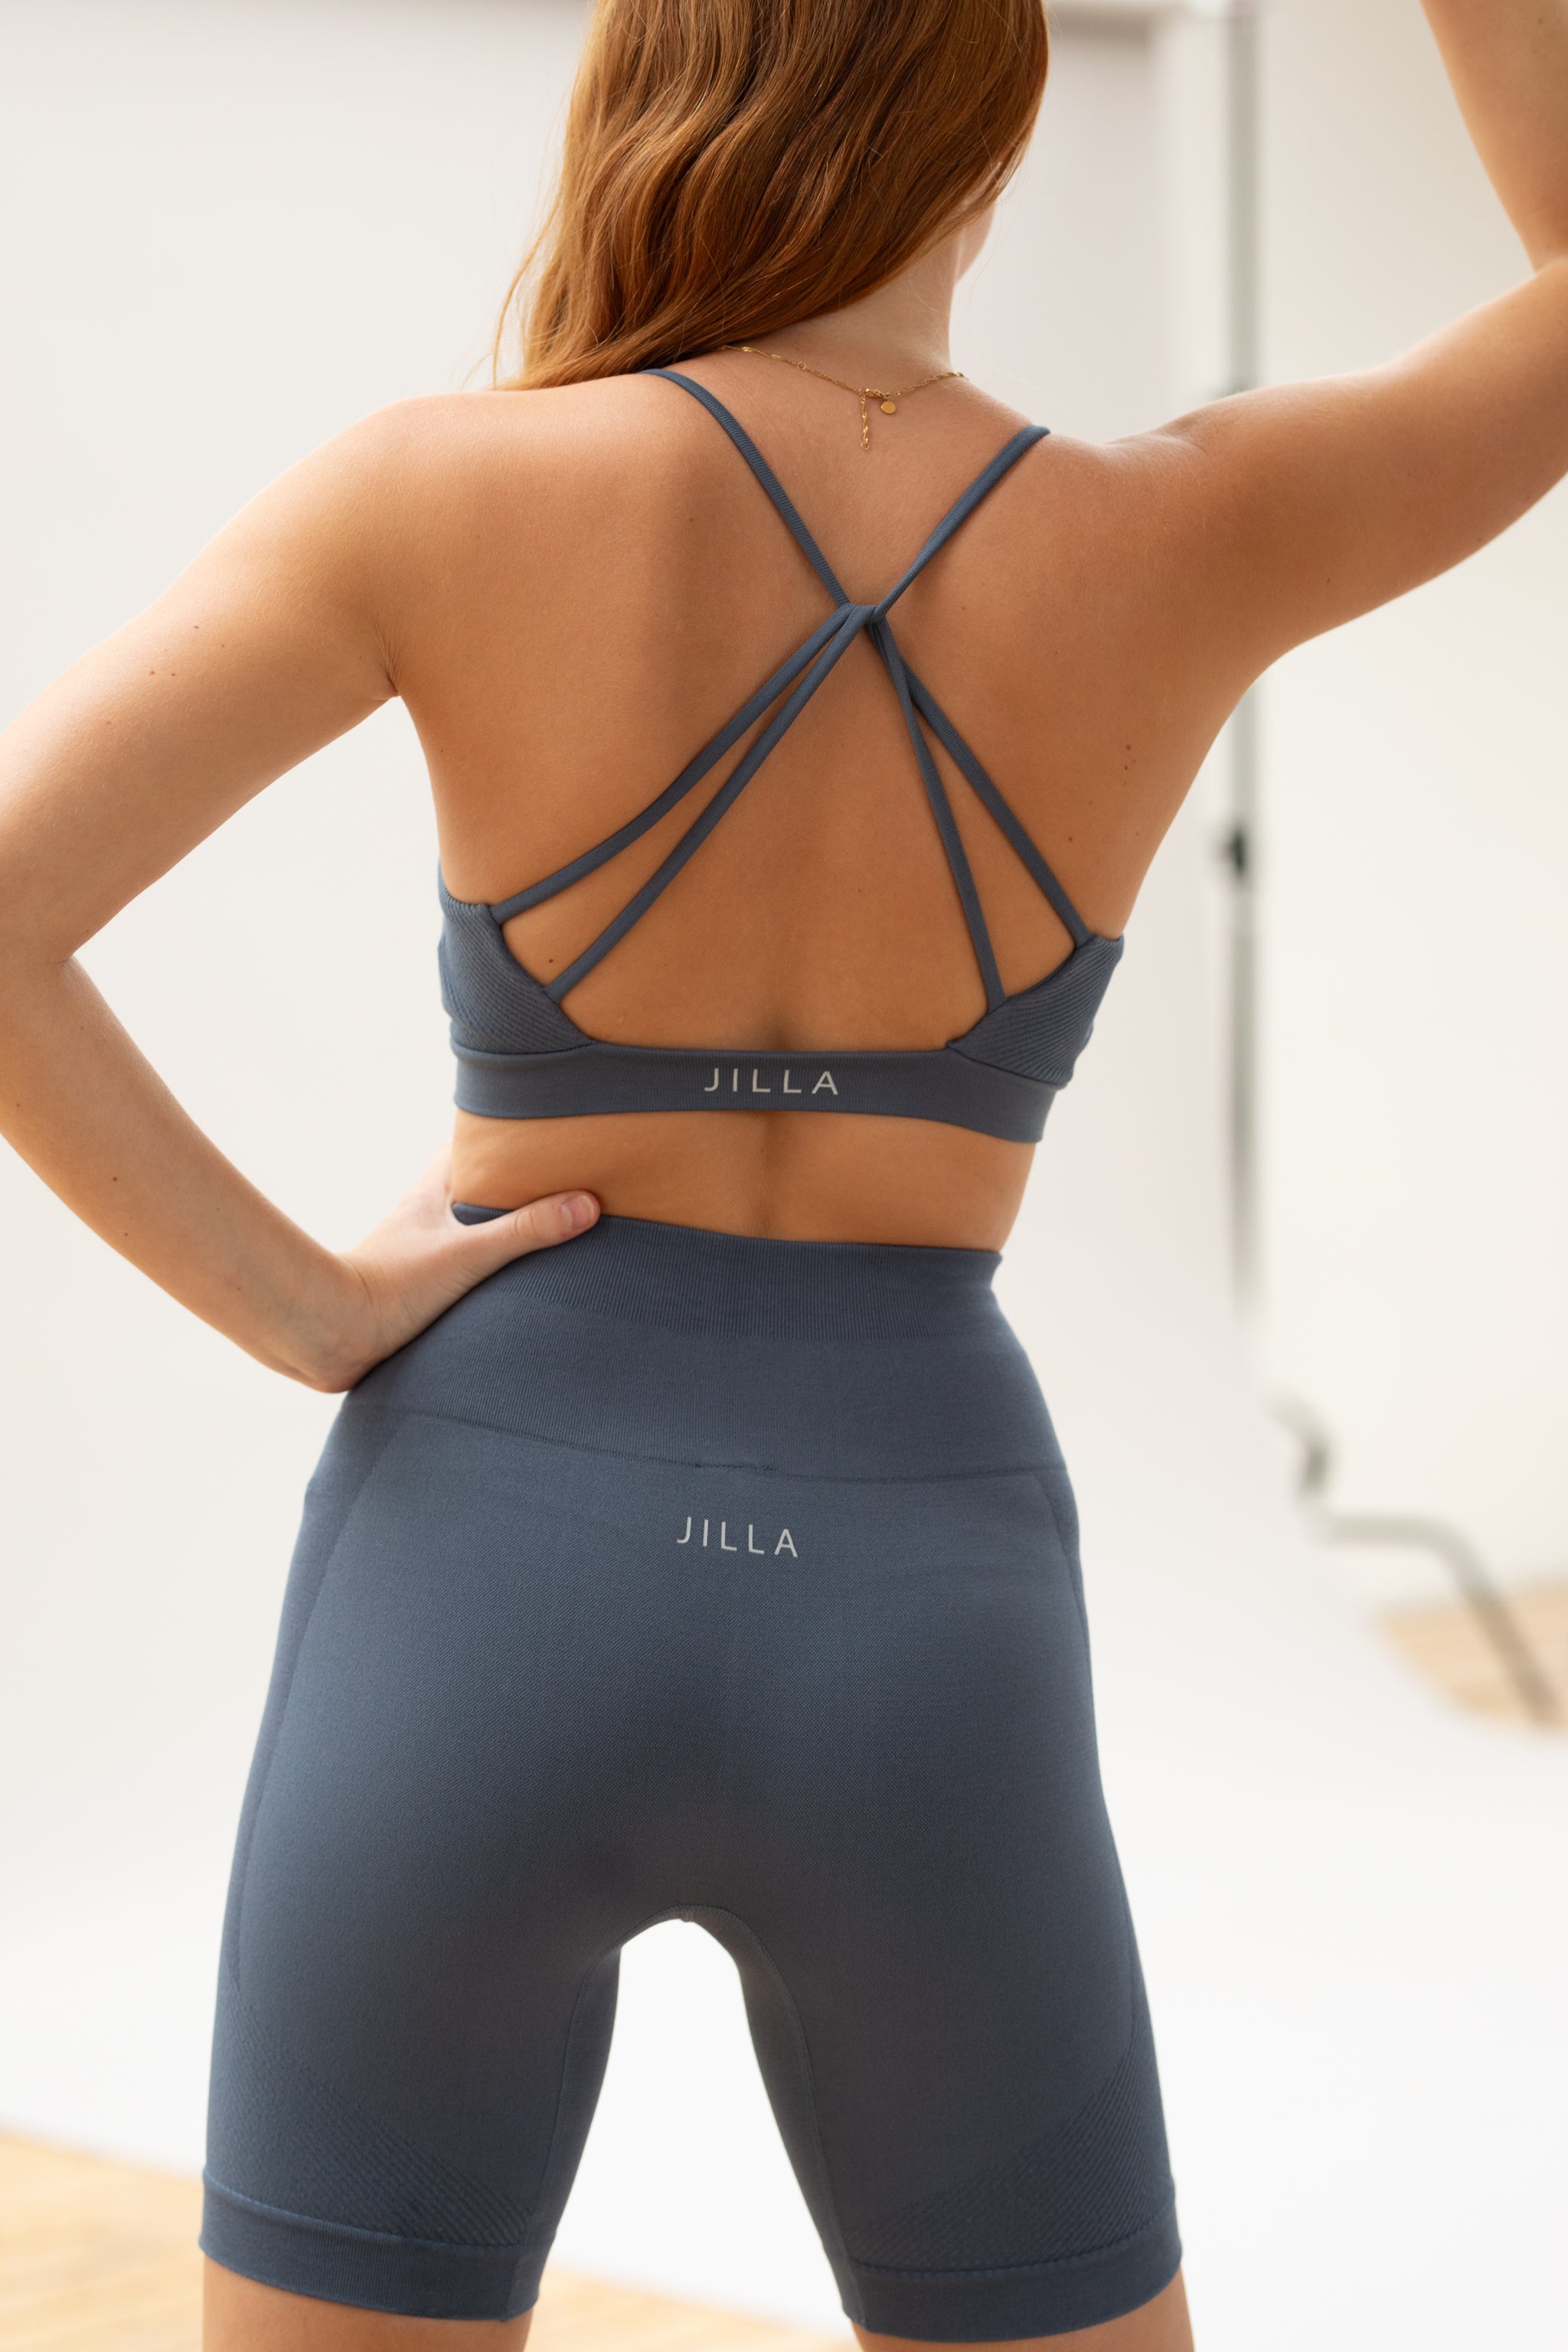 Model wearing blue supportive sports bra and blue cropped leggings for sustainable women activewear brand, Jilla.